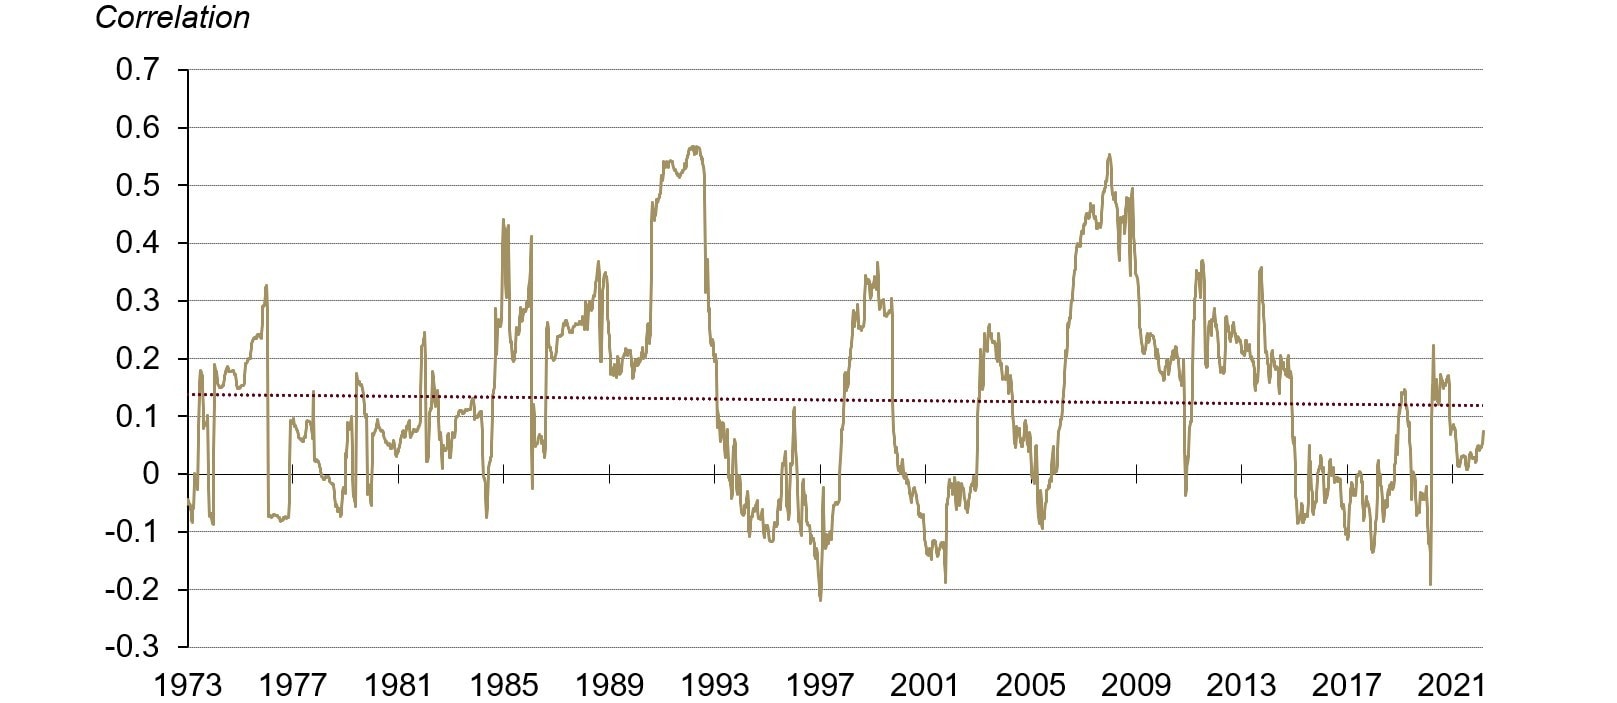 There is no consistent long-term relationship between gold and oil